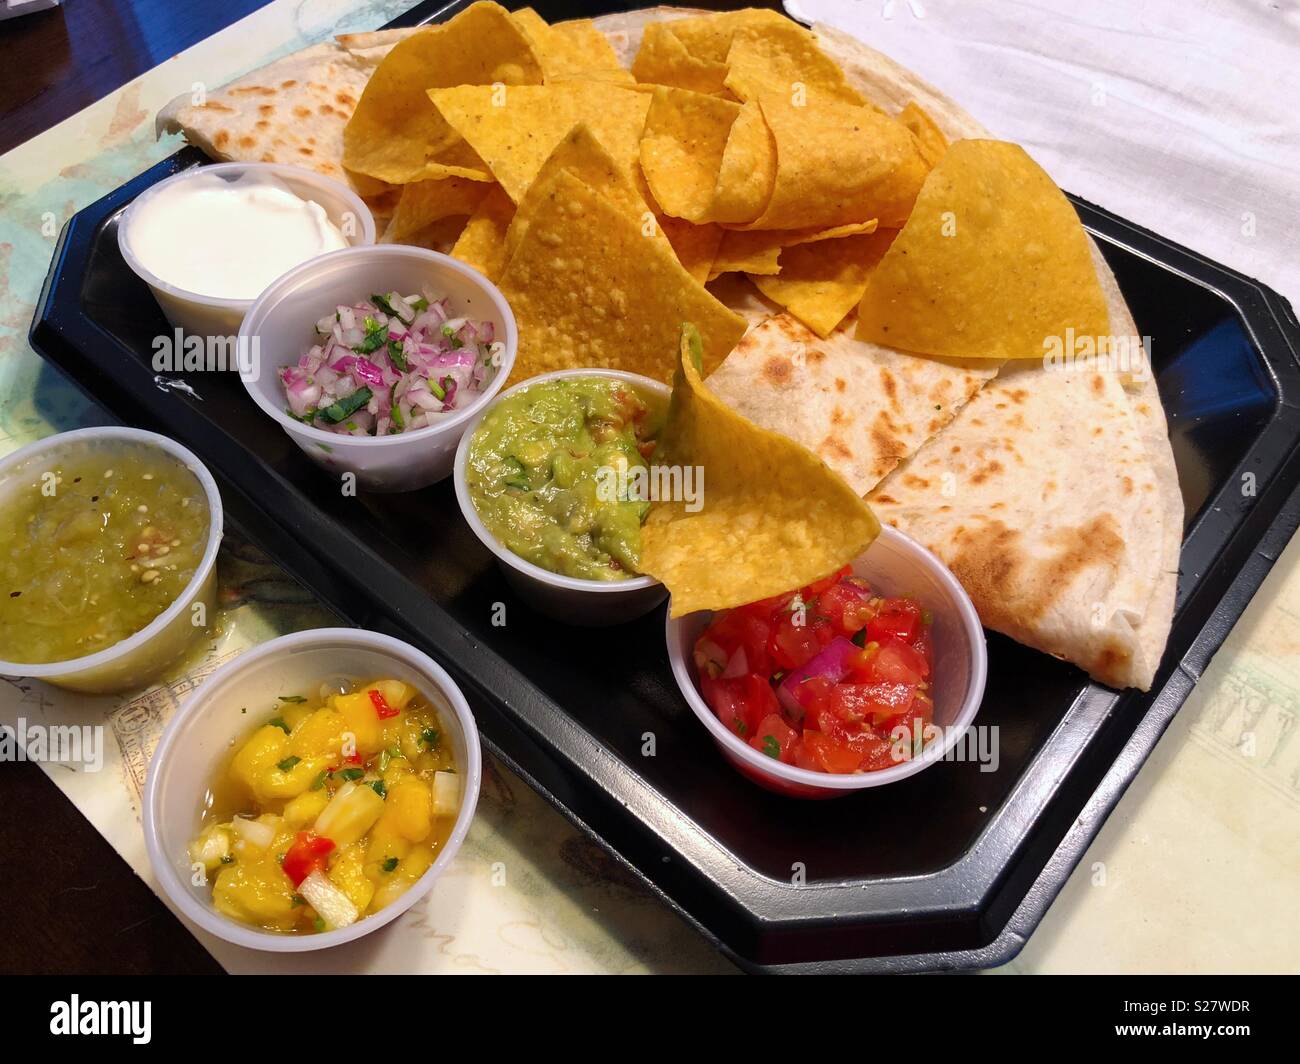 Corn chips, various salsas and a quesadilla on a plastic disposable plate Stock Photo